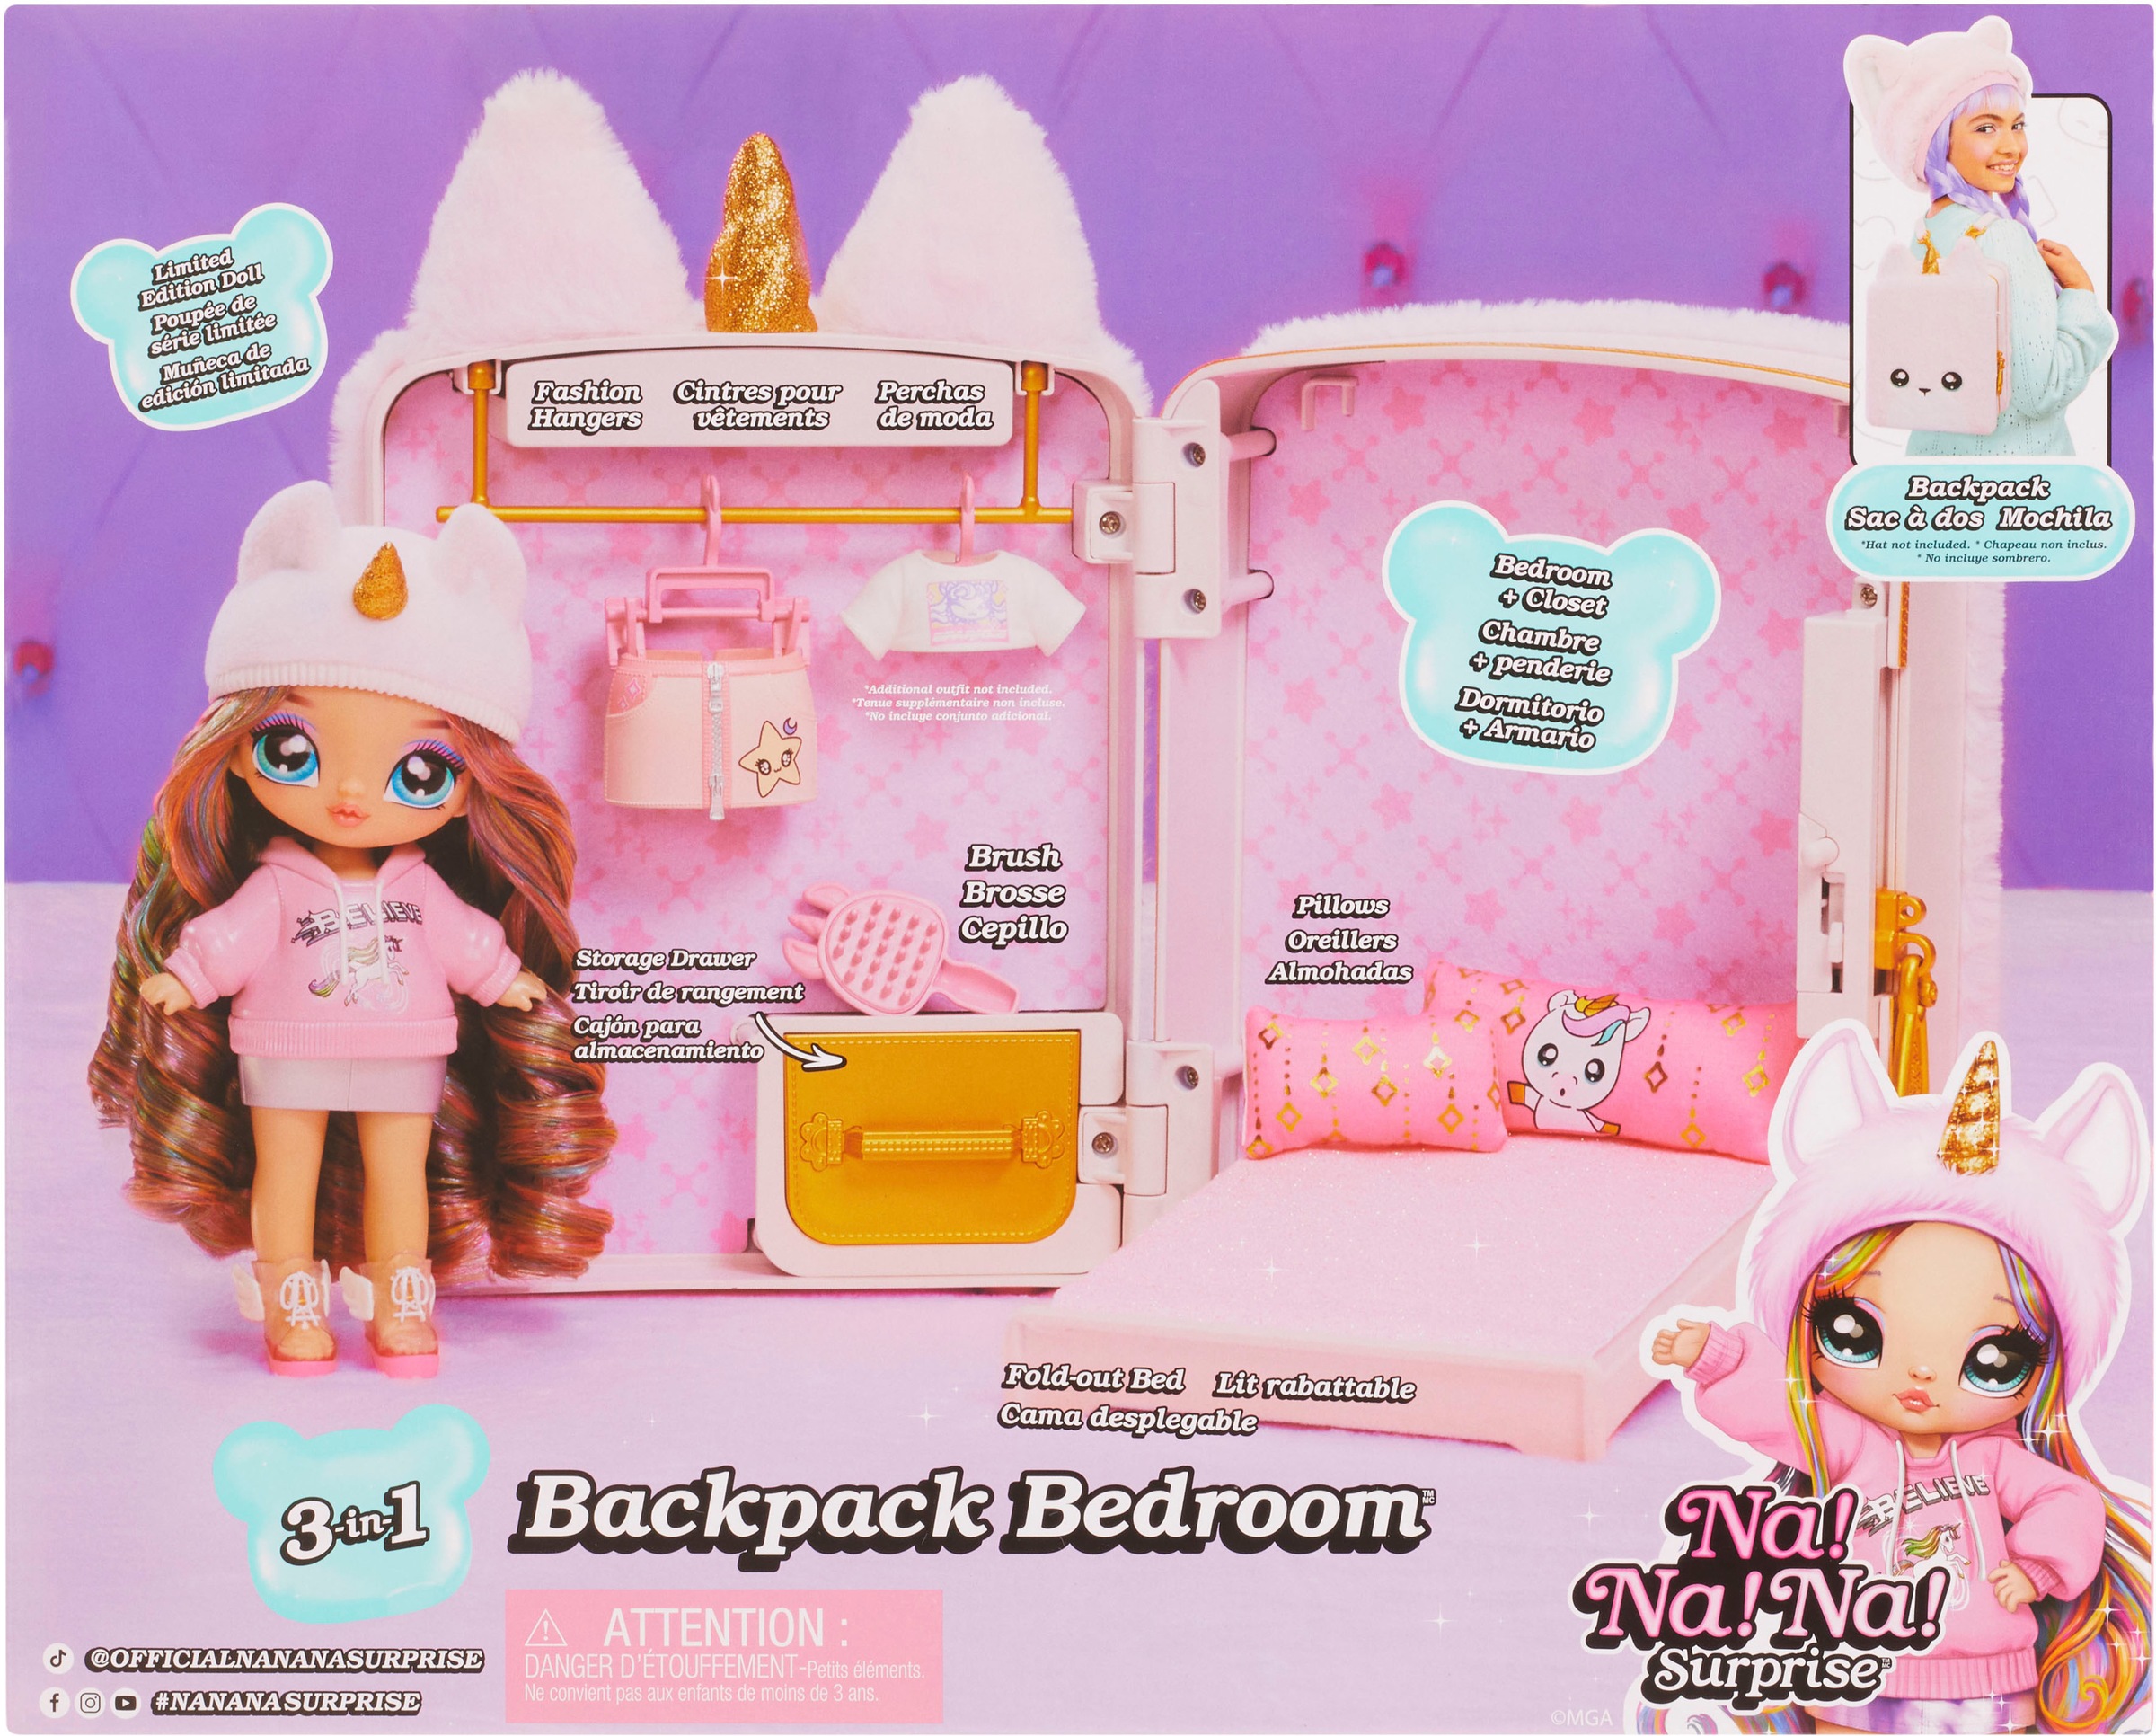 MGA ENTERTAINMENT Puppenmöbel »3in1 Backpack Bedroom Unicorn Playset- Britney Sparkles«, Na! Na! Na! Surprise